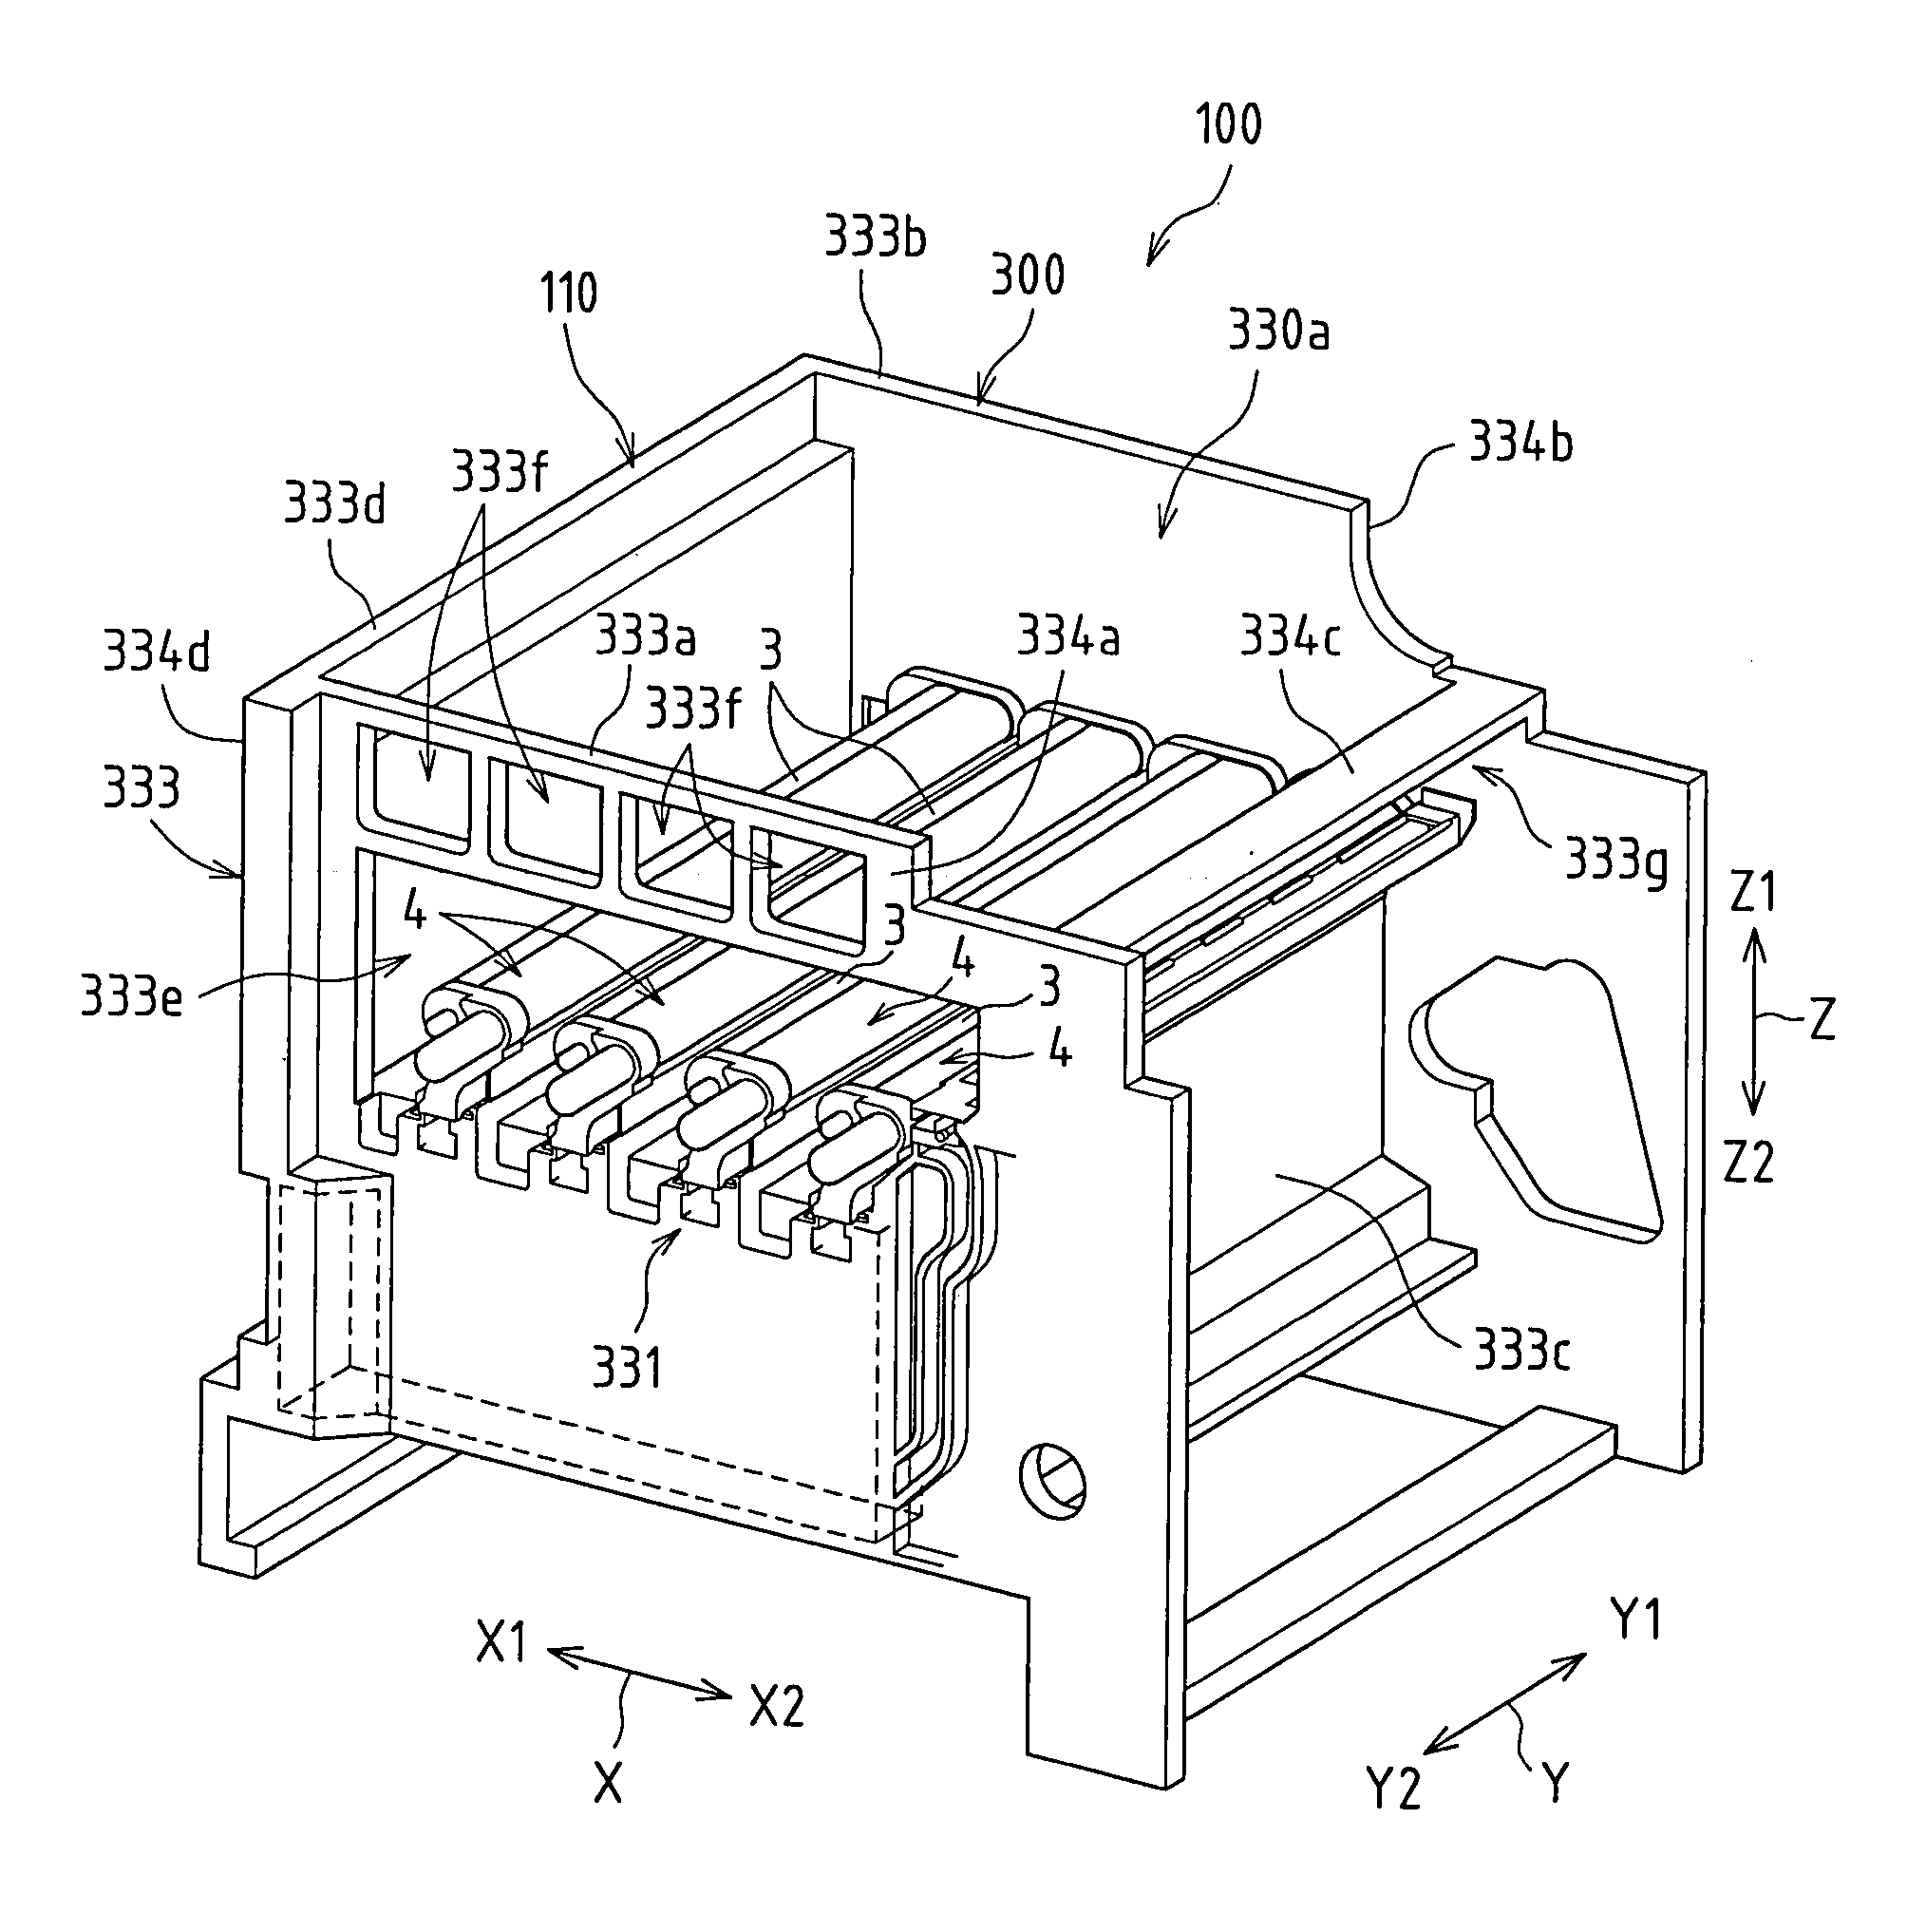 Image forming apparatus with resin frame and method for molding the resin frame